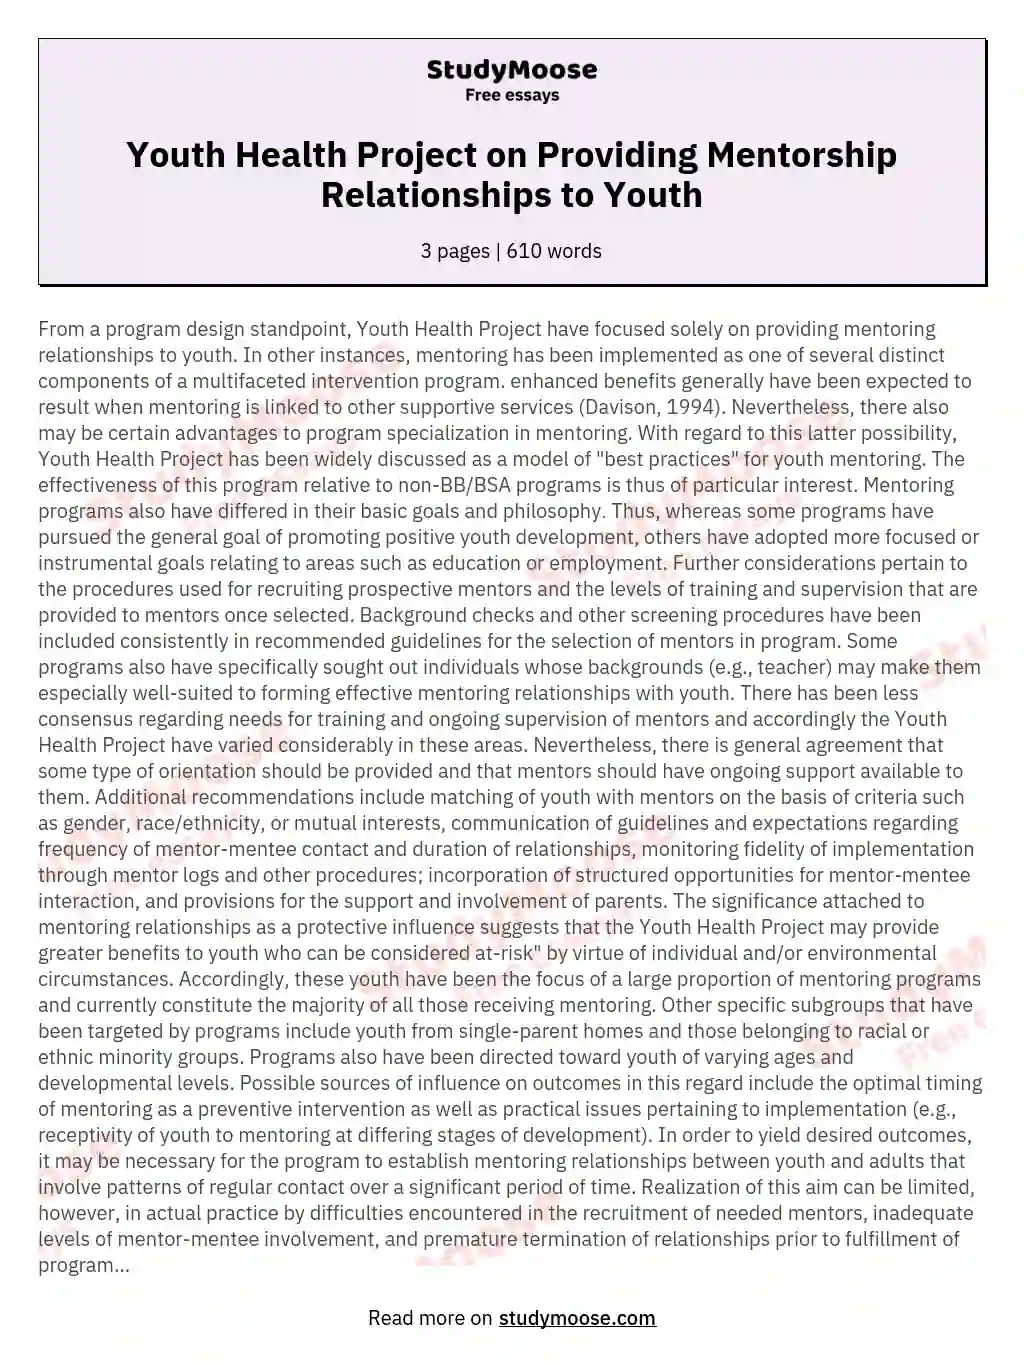 Youth Health Project on Providing Mentorship Relationships to Youth essay